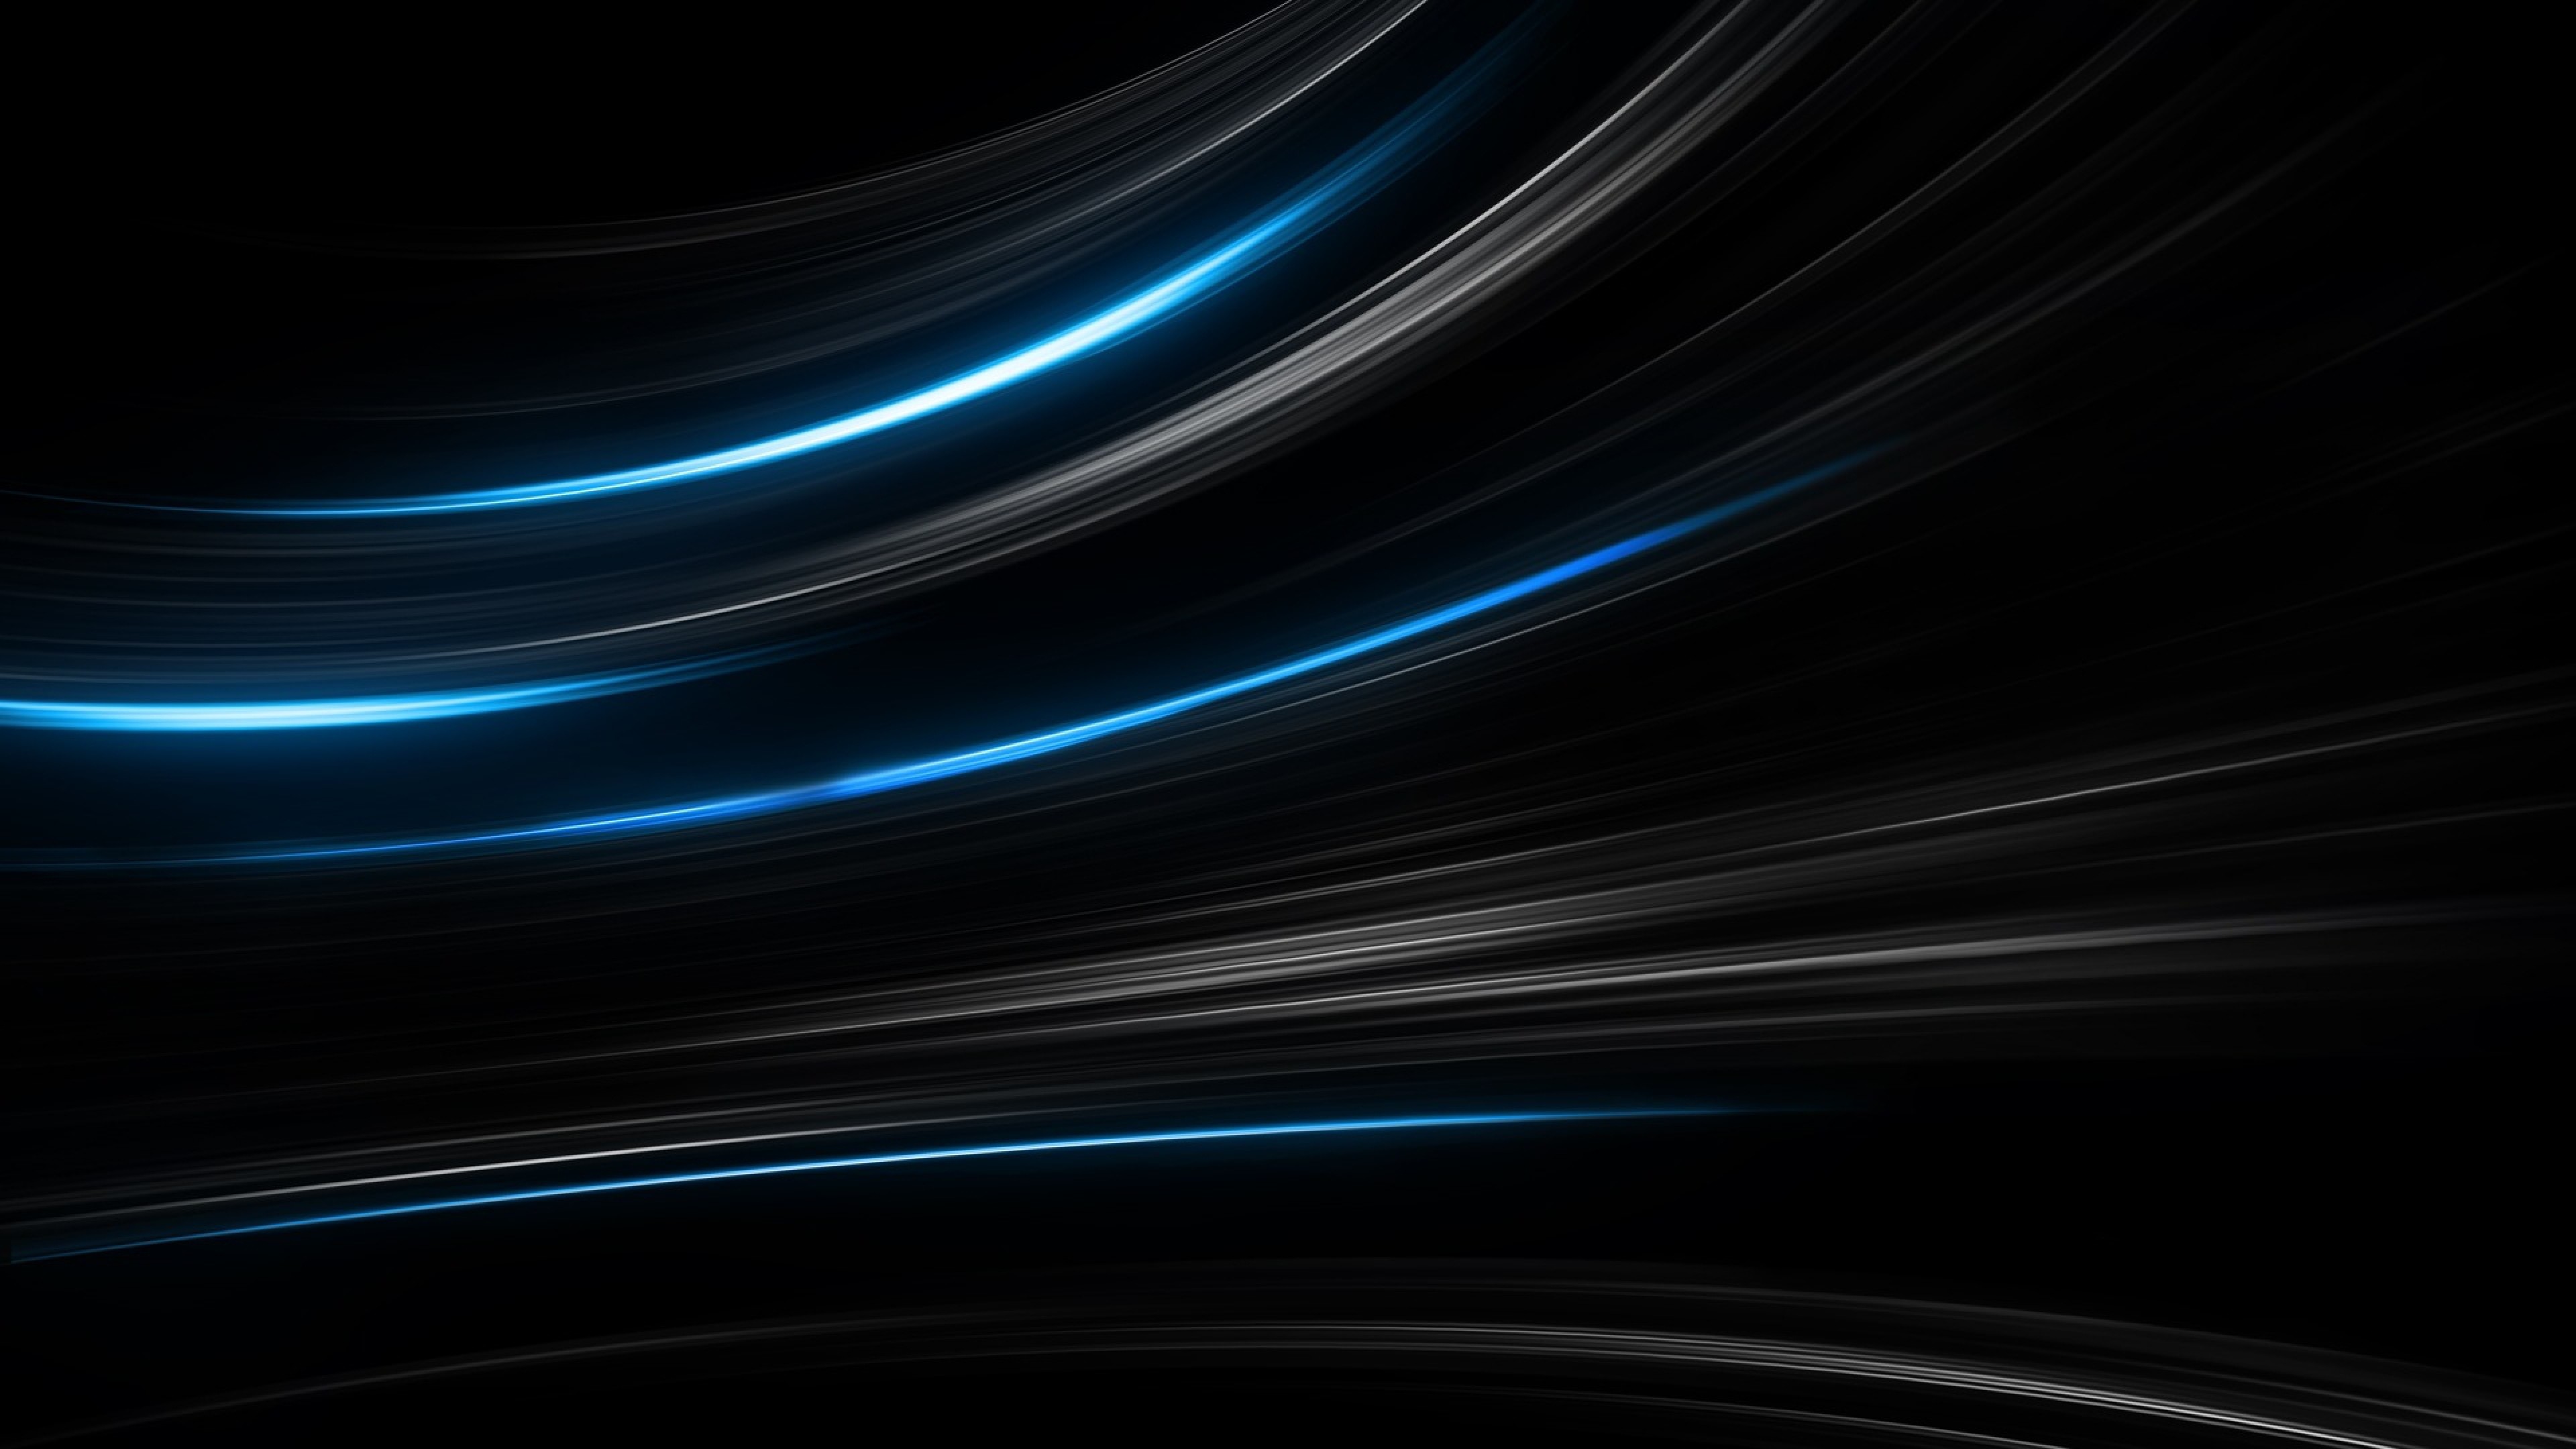 Black and Blue Abstract Wallpaper Backgrounds 1233 – HD Wallpaper Site